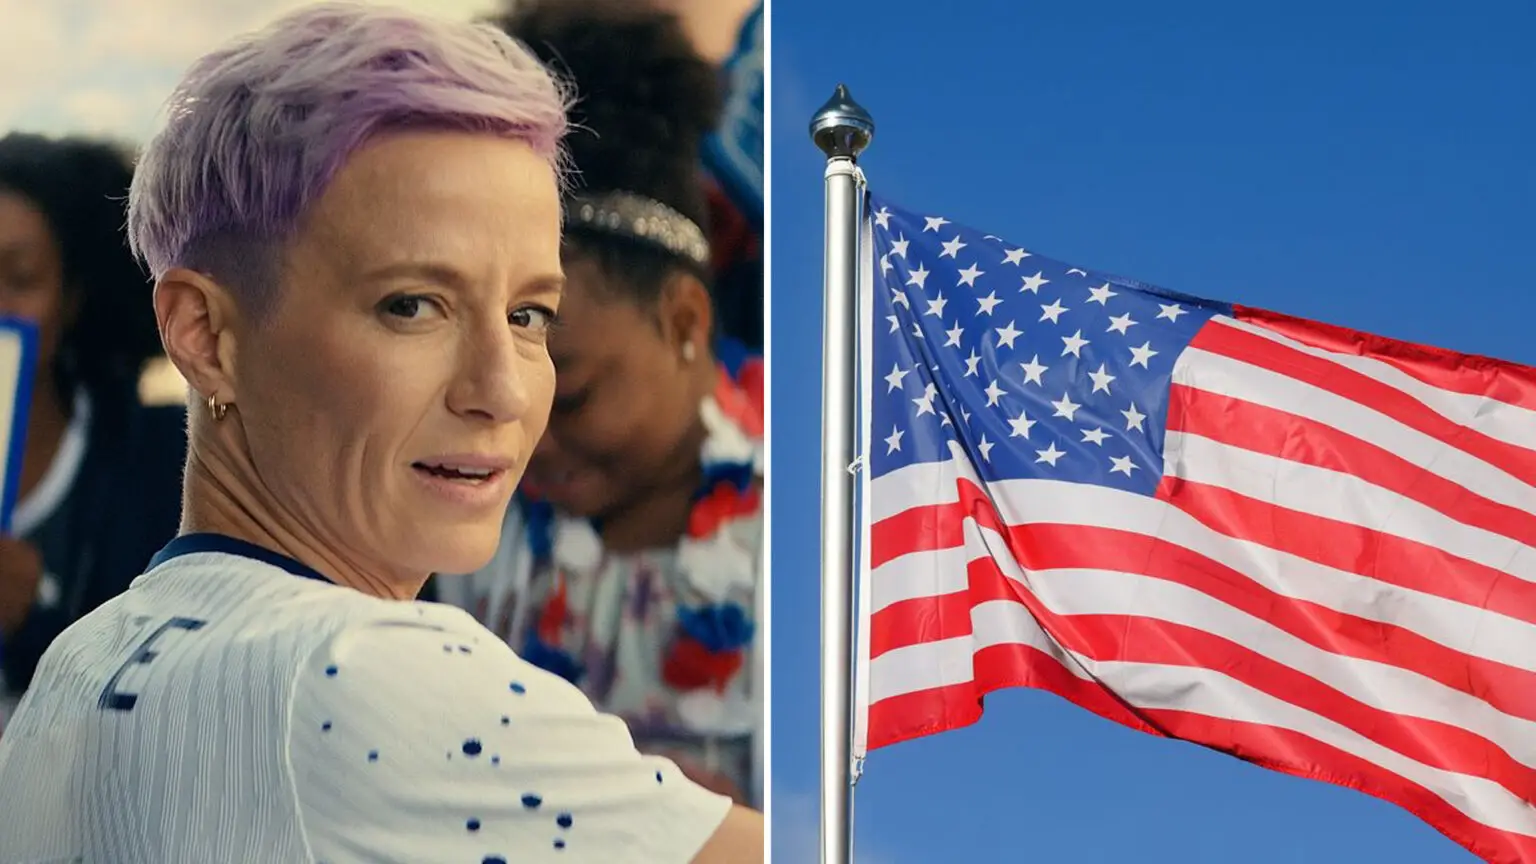 “never Coming Back Here” Megan Rapinoe Books Tickets To Leave America Popular News 